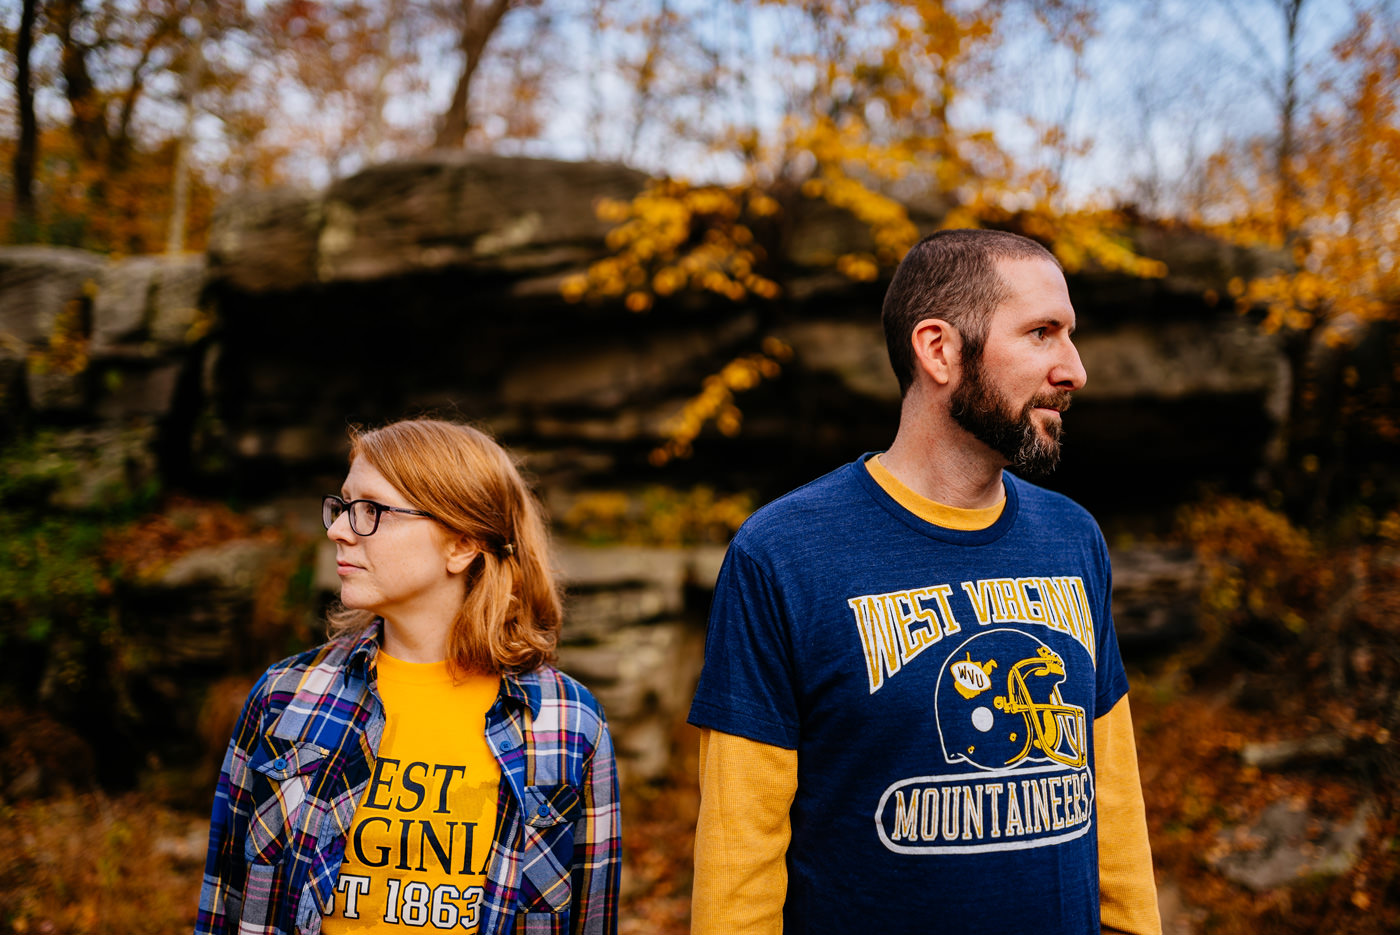 engagement session featuring wvu apparel